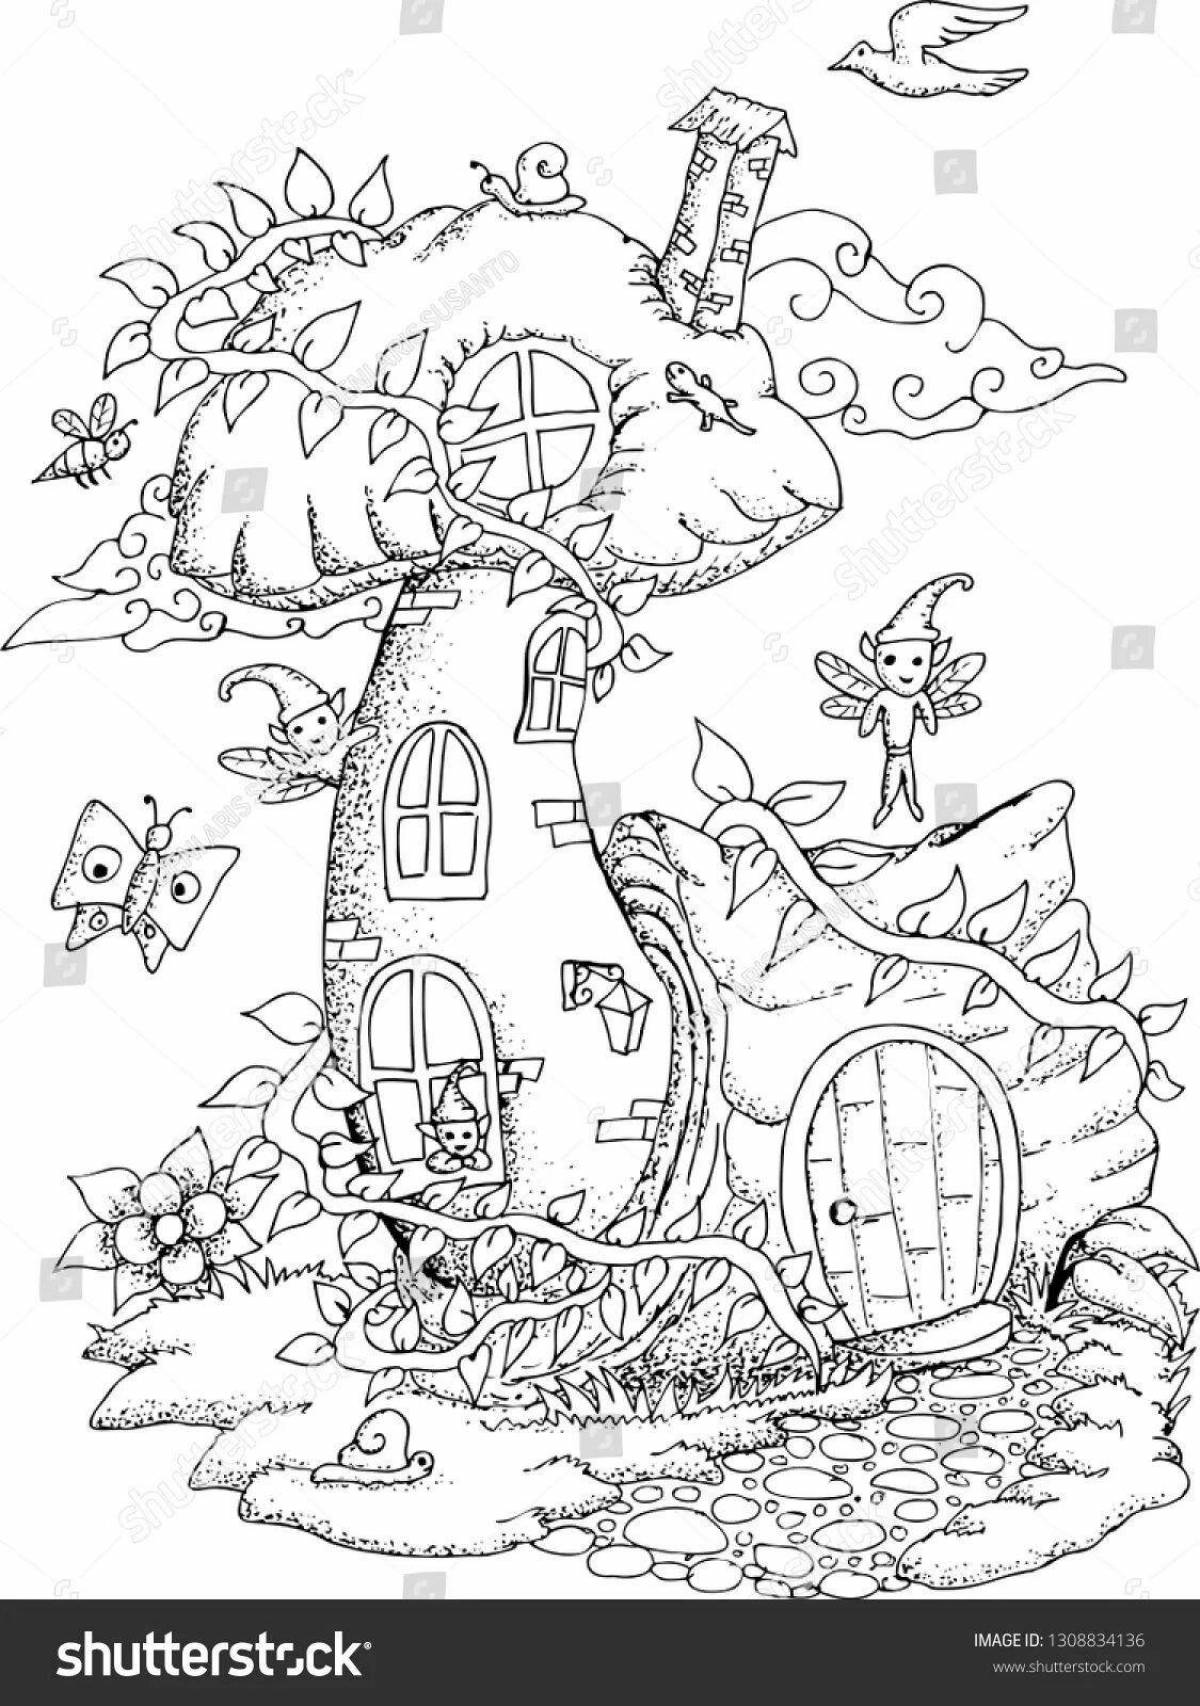 Dazzling magic house coloring book